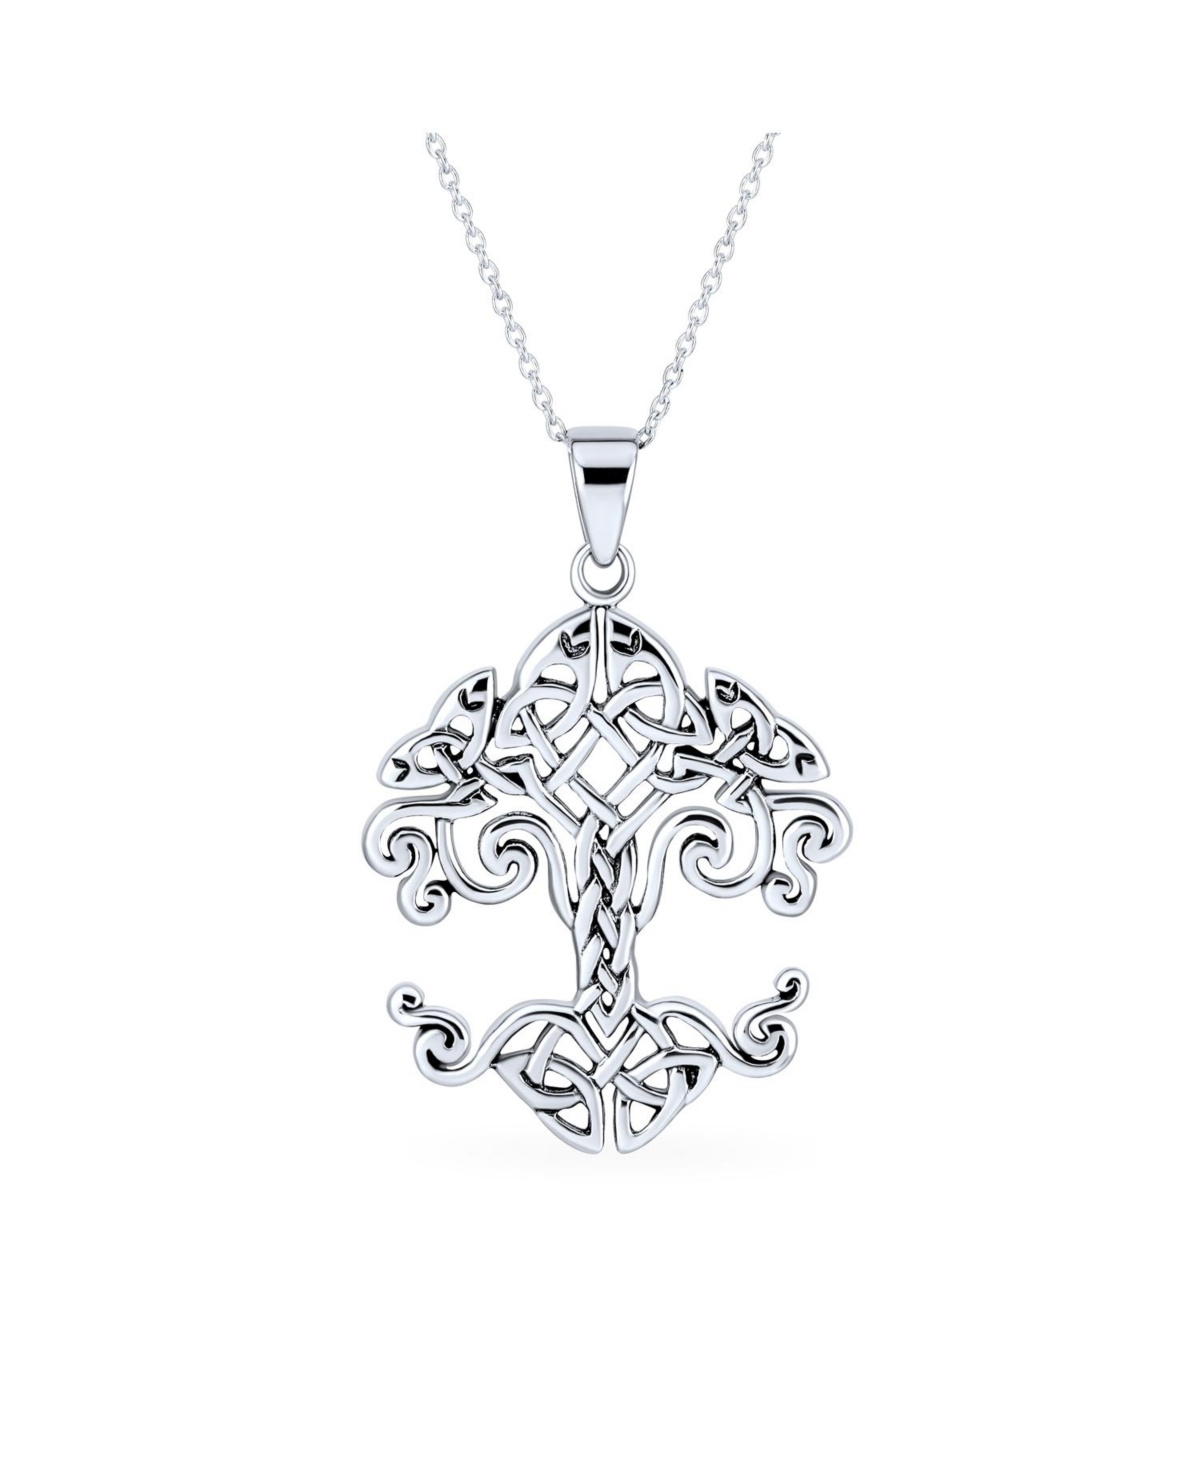 Medium Celtic Matriarch Mothers Family Wishing Tree Of Life Pendant Necklace For Women Oxidized .925 Sterling Silver 18 Inch - Silver to